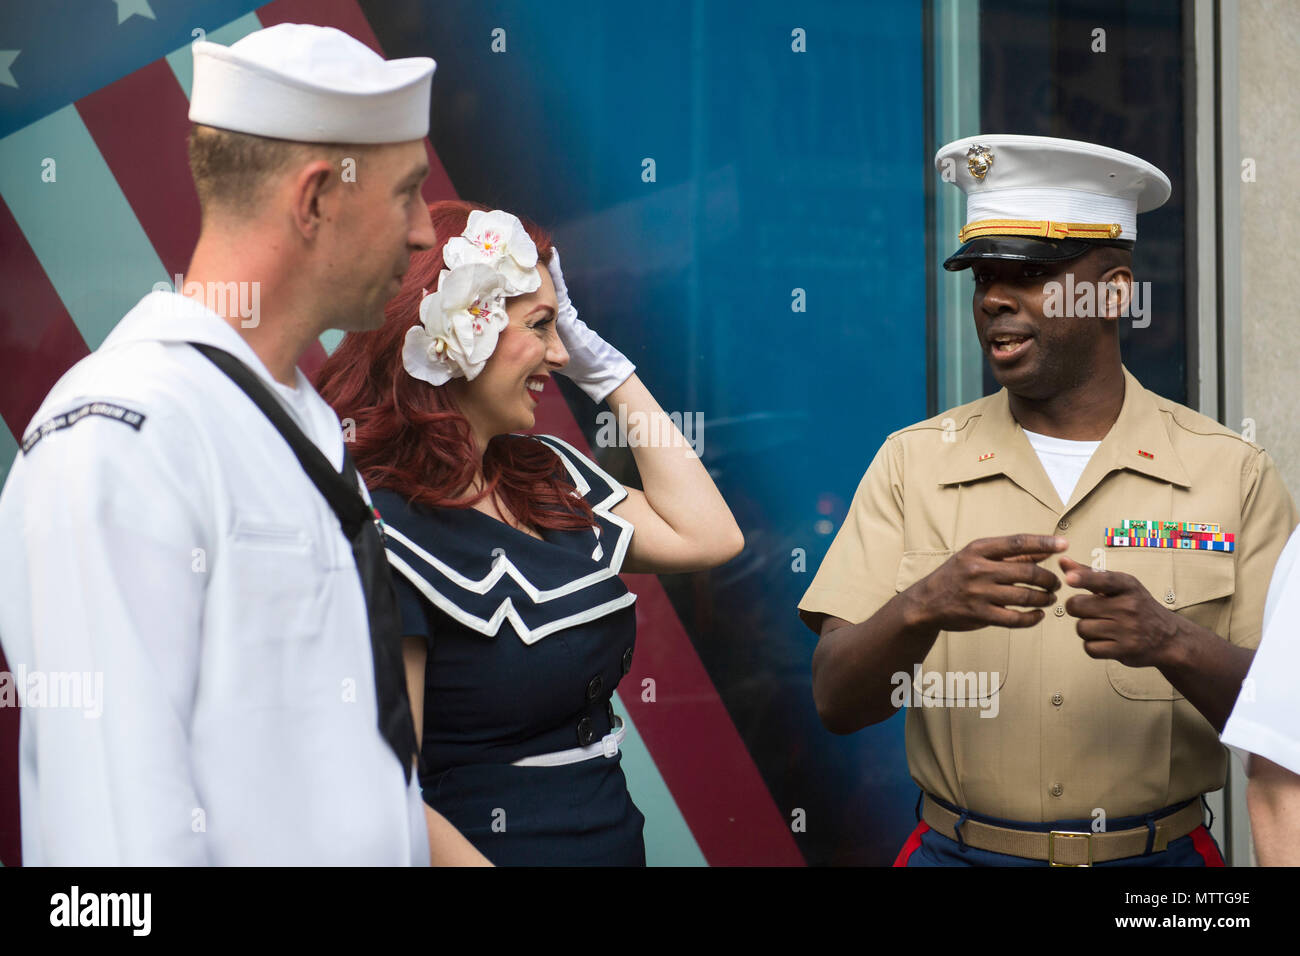 180526-N-HB733-0054 NEW YORK (May 25, 2018) Mineman 1st Class Keenan Rogers, of Minneapolis, Minnesota, assigned to the Littoral Combat Ship USS Little Rock (LCS 9), and Chief Warrant Officer Avin Hinton of Chesapeake City, Maryland, assigned to the Combat Logistics Regiment 25, speak with a member from the American Bombshells at the Fox and Friends Morning show BBQ competition during Fleet Week New York (FWNY). Now in its 30th year, FWNY is the city’s time-honored celebration of the sea services. It is an unparalleled opportunity for the citizens of New York and the surrounding tri-state area Stock Photo